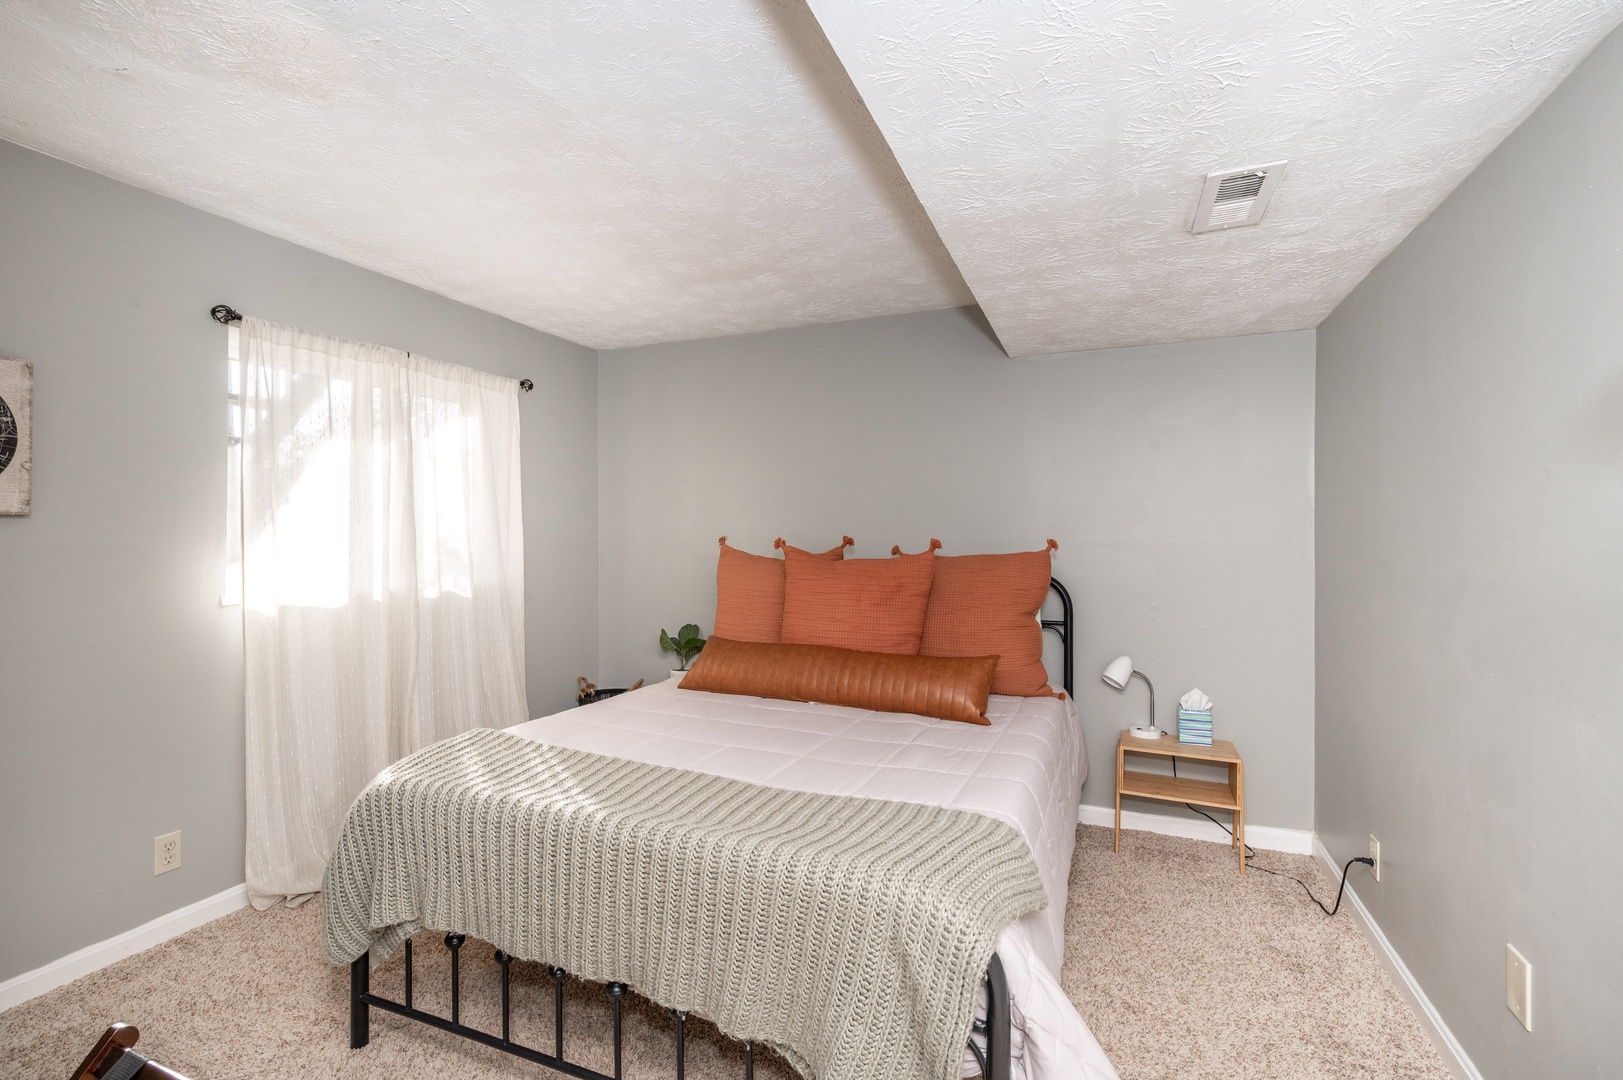 The lower-level bedroom offers privacy & a cozy queen bed